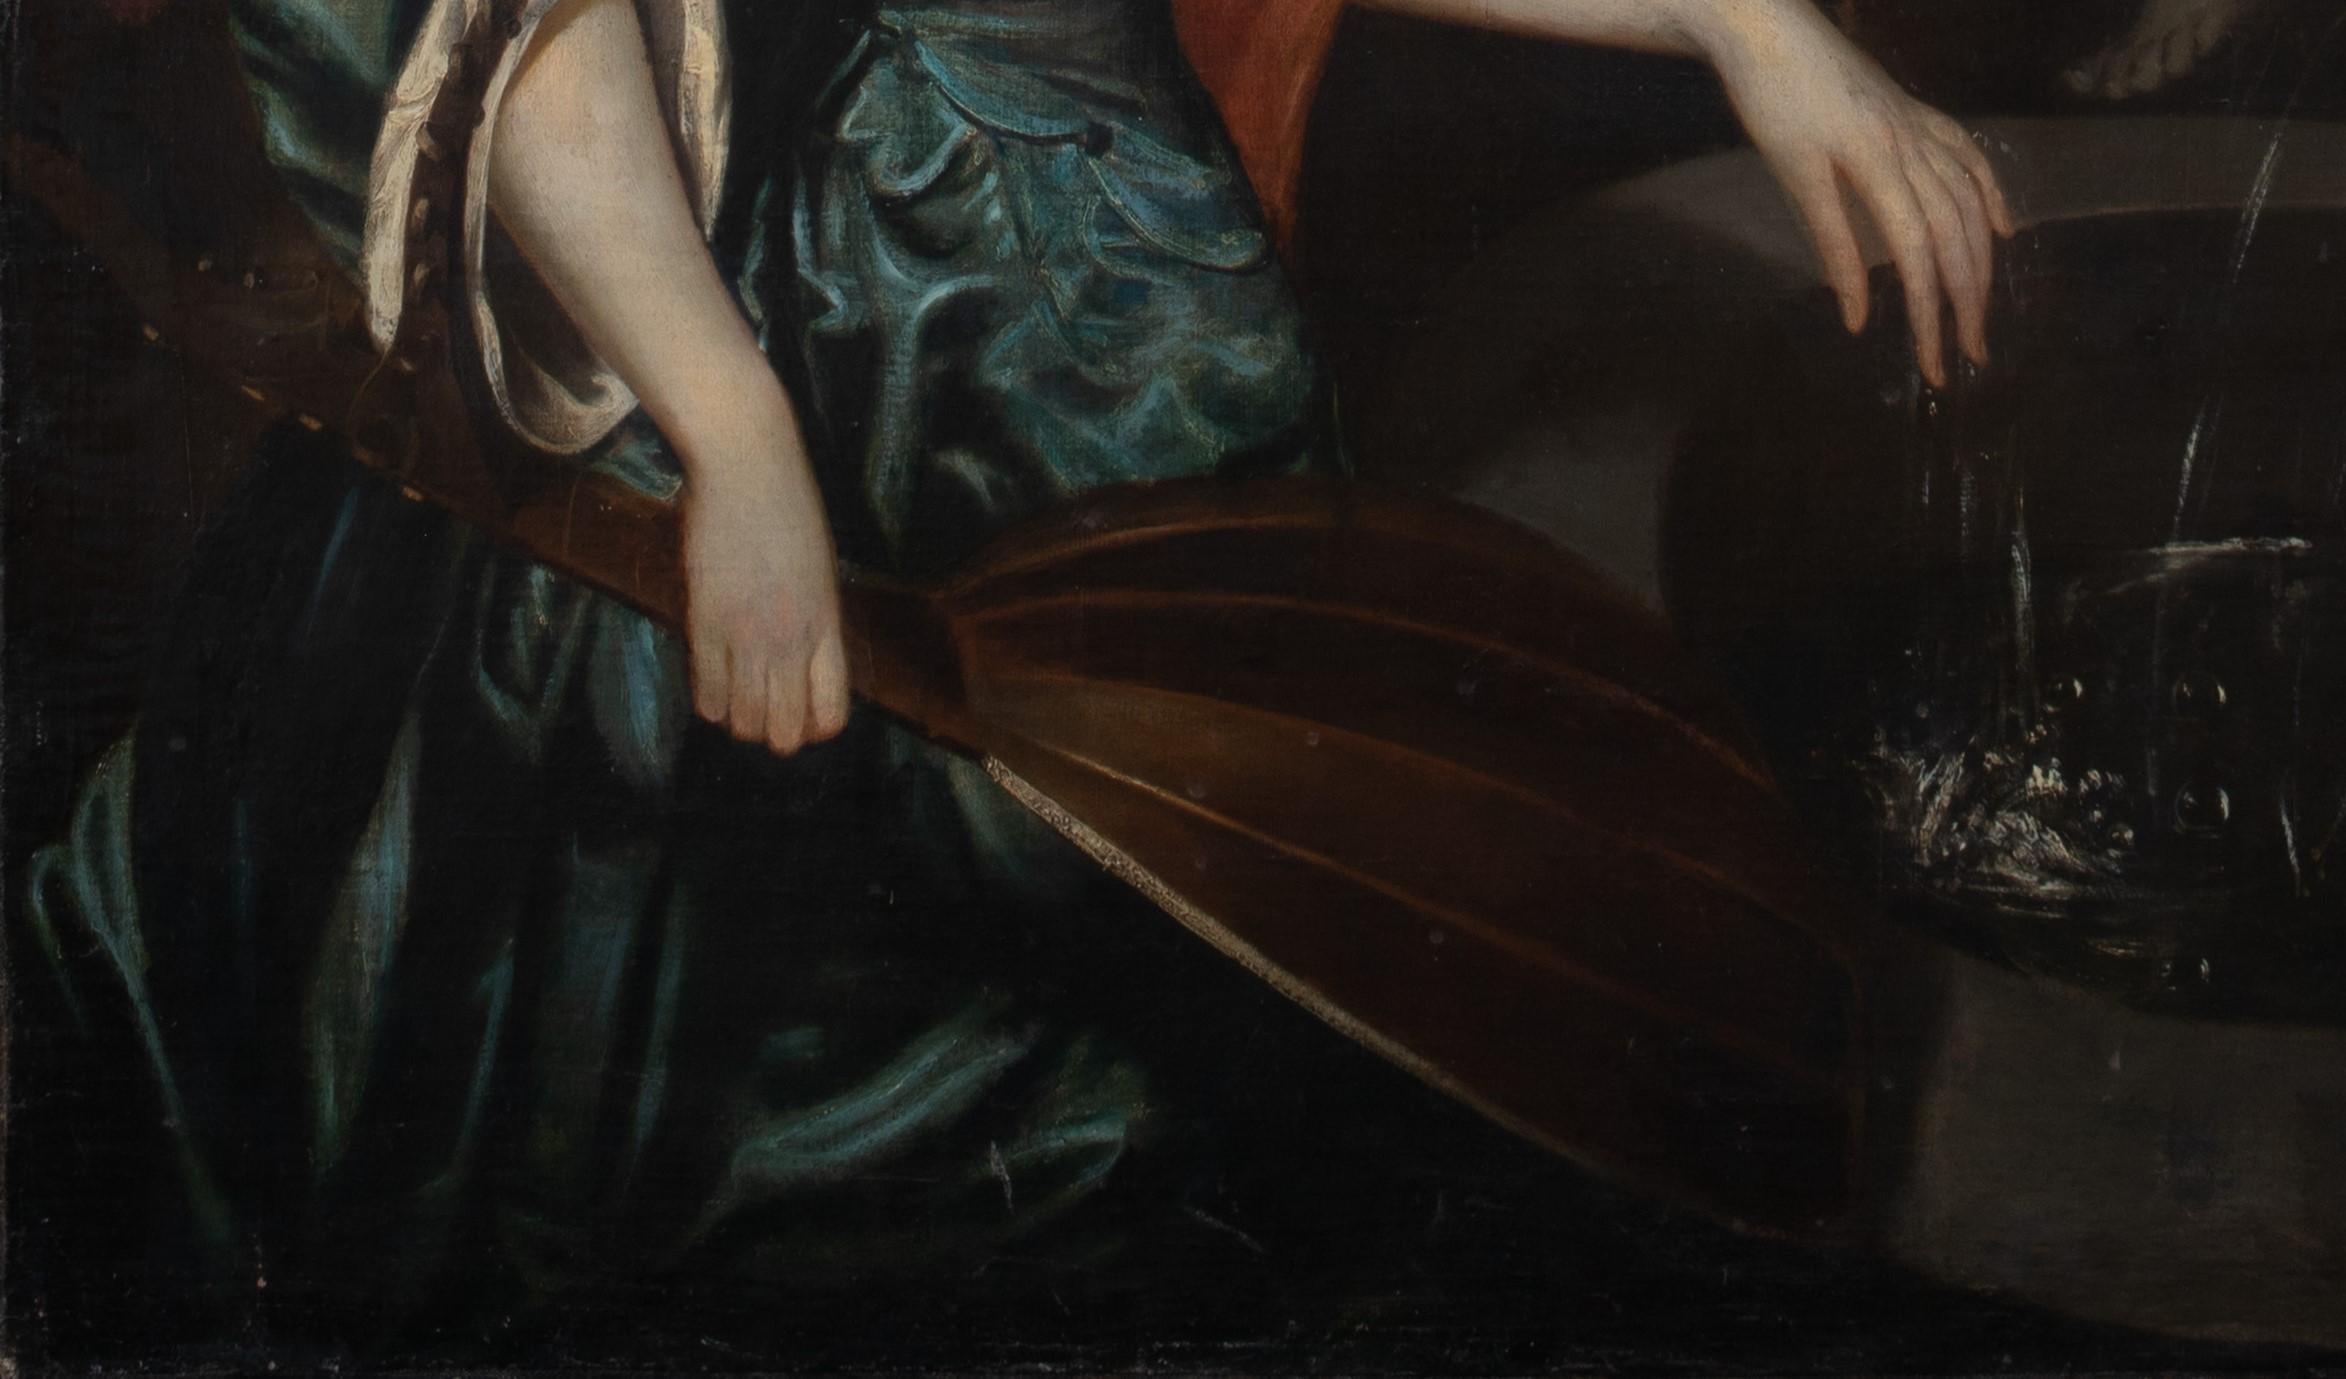 PPortrait Of Barbara Villiers (1640–1709), Countess of Castlemaine and Duchess of Cleveland 

Circle of Sir Peter Lely (1618-1680)

Huge 17th Century Old Master portrait of Barbara Villiers, oil on canvas. Excellent quality and condition portrait of